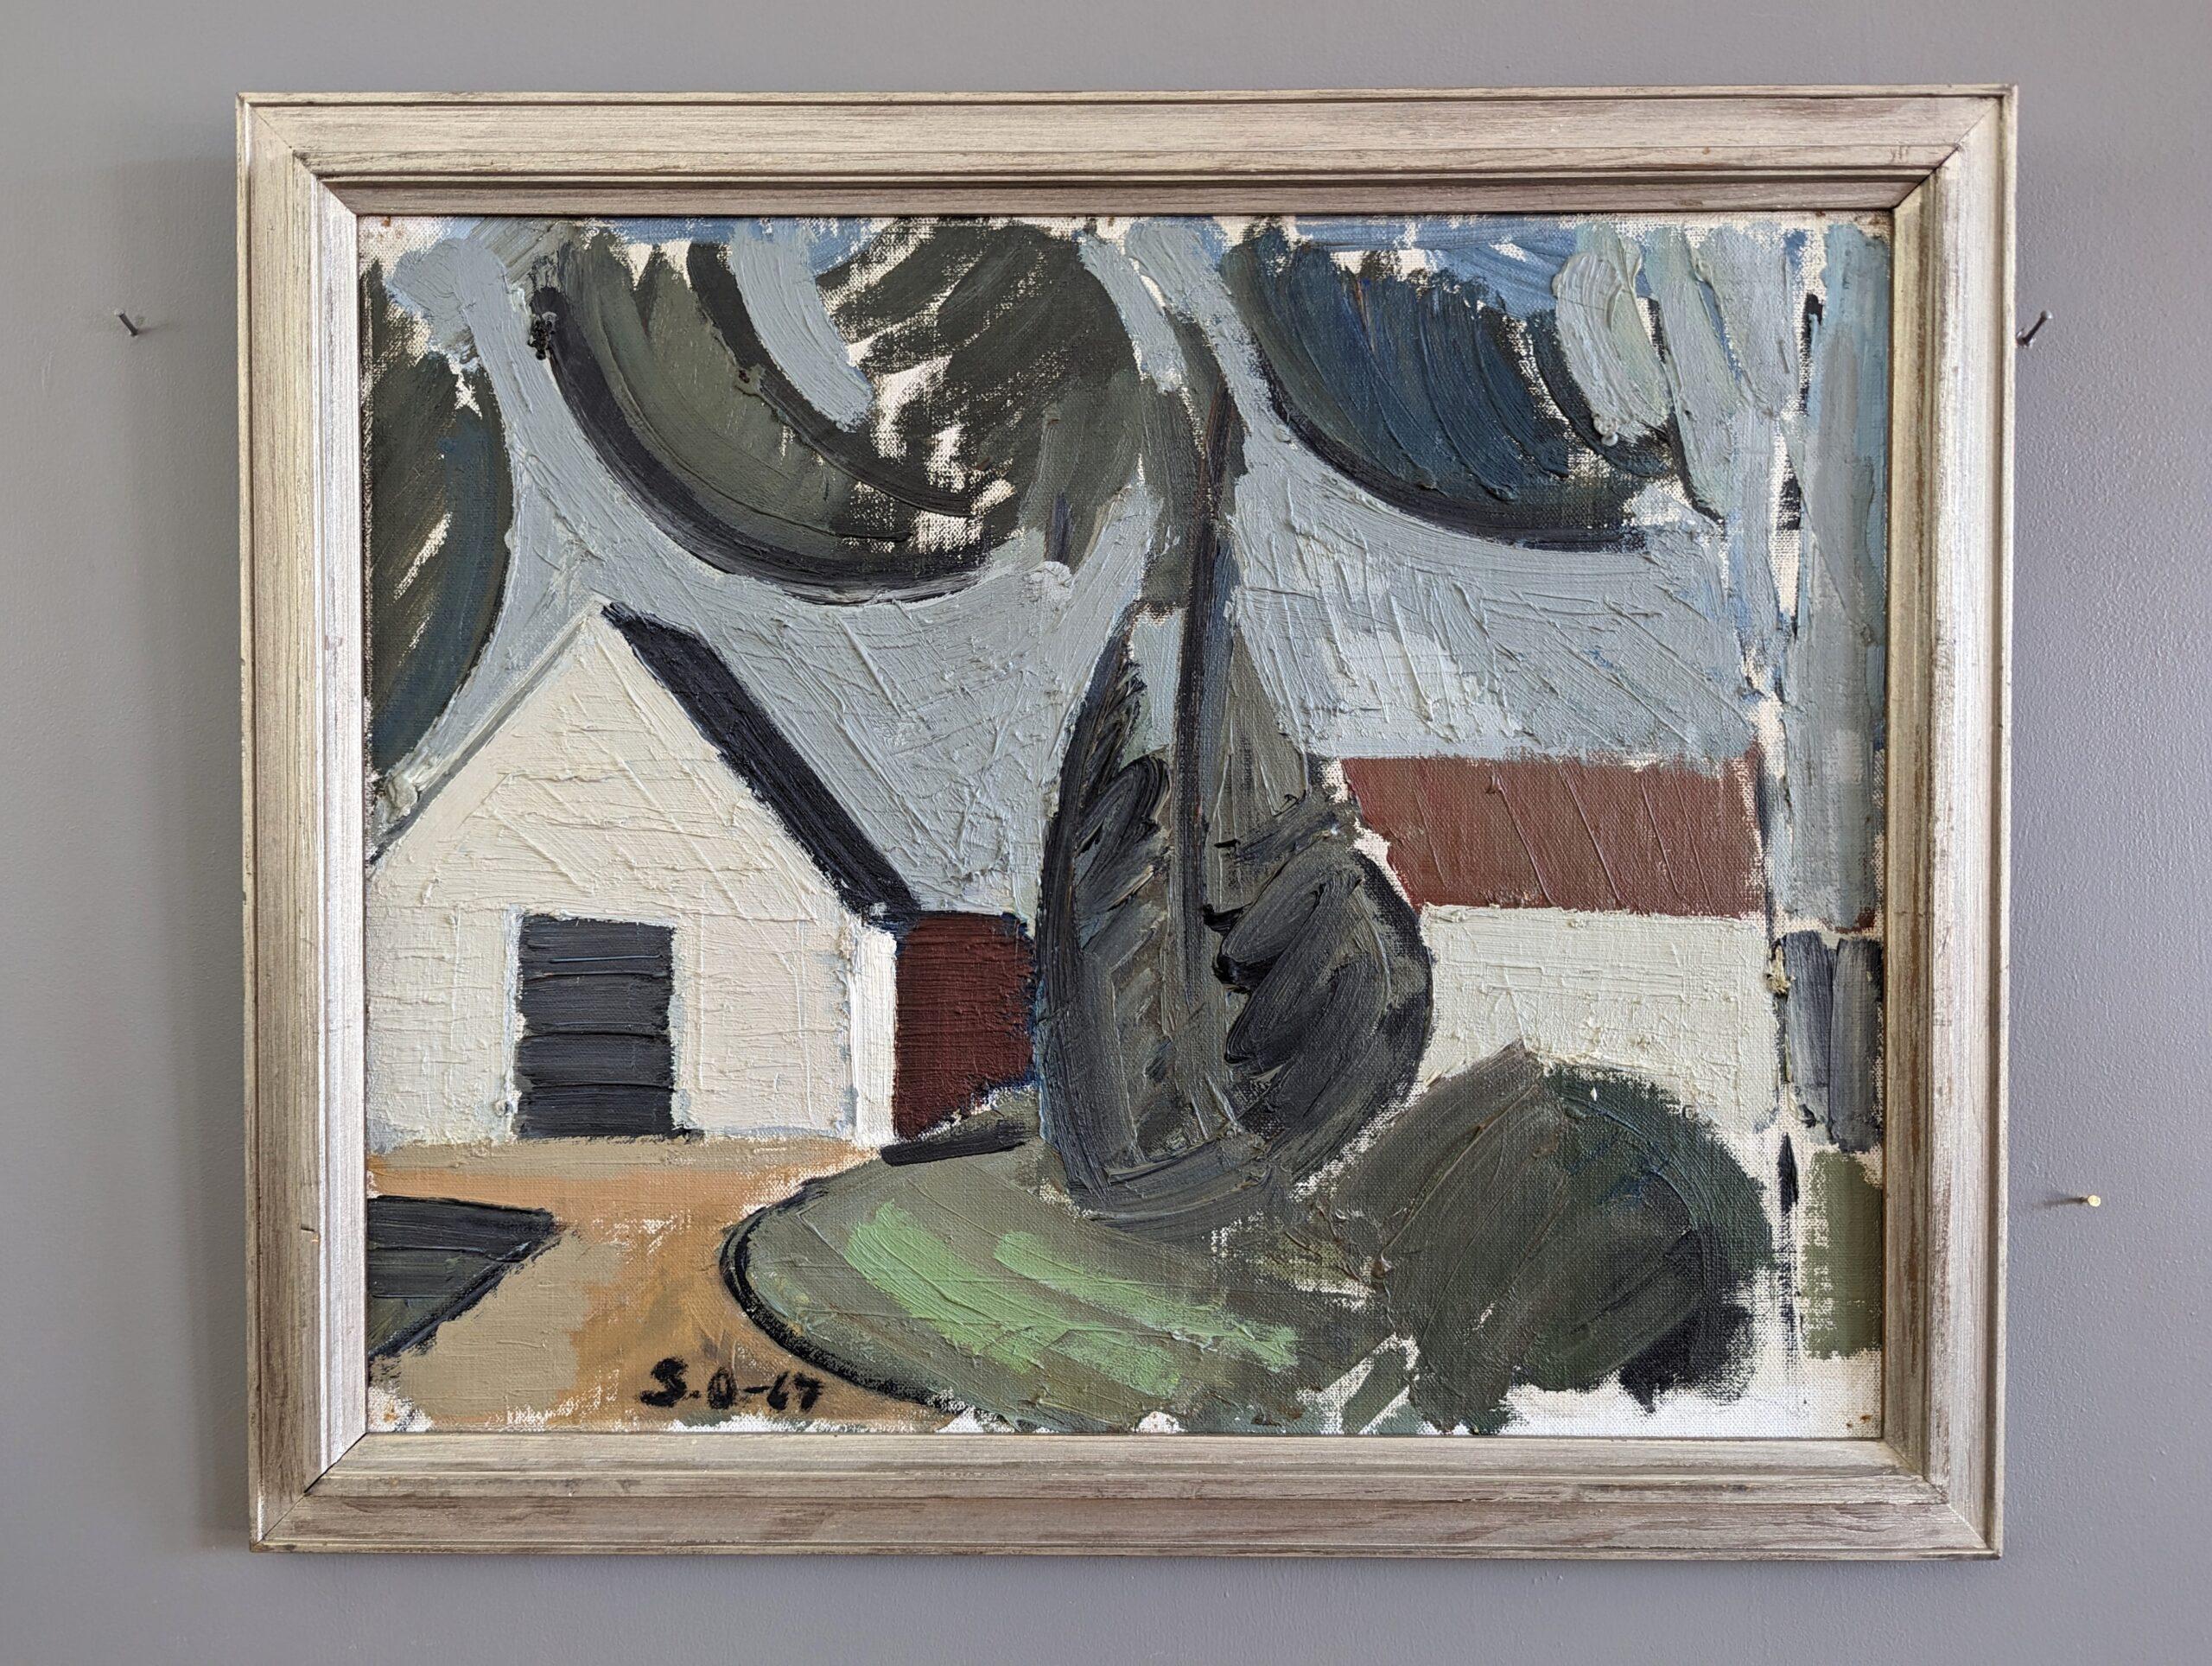 HOUSE BY THE TREES
Size: 39 x 47 cm (including frame)
Oil on Board

A very pleasant modernist-style street scene composition, executed in oil onto board and dated 1967.

In the foreground, a pathway leads the viewer’s gaze towards a row of houses.